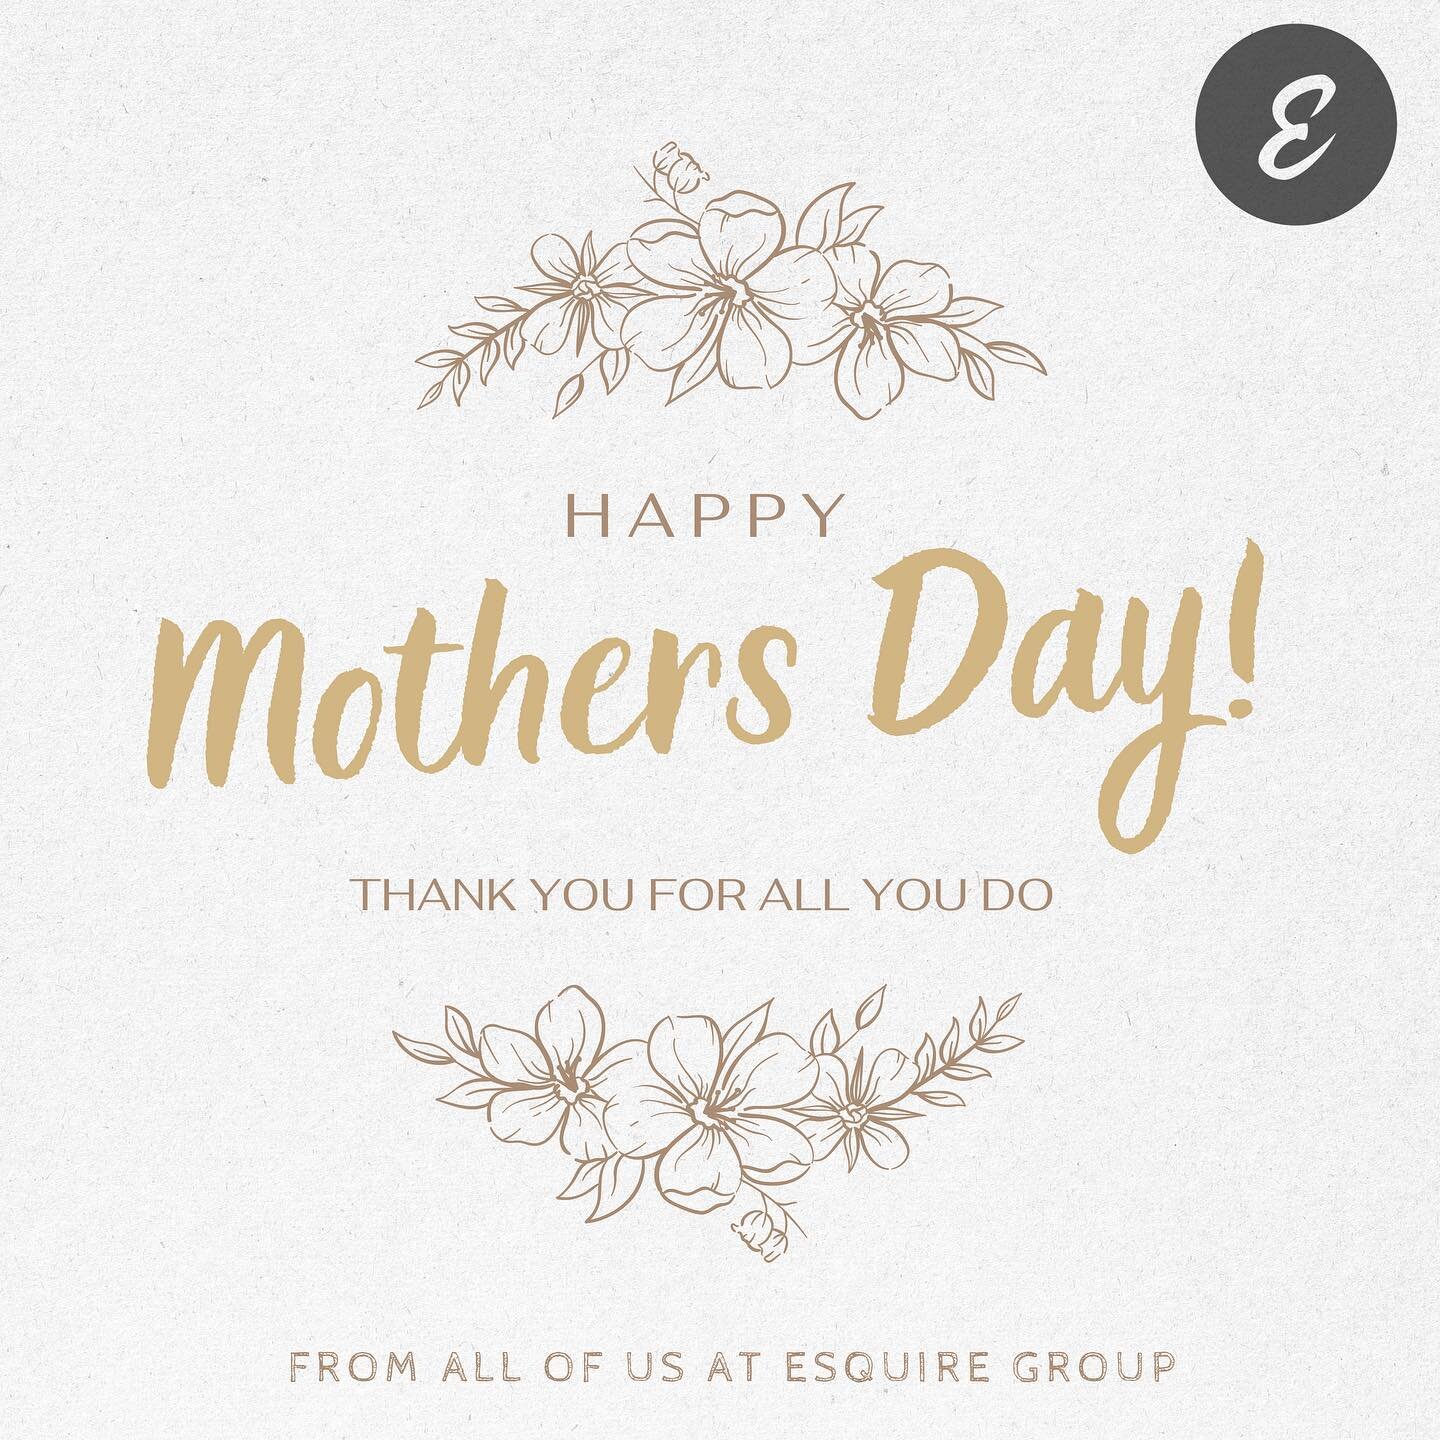 Today we celebrate our fierce and selfless mothers 🥰. 

Thank you for all you. Have an amazing day 😊

&mdash;
#mothersday #esquiregroup #esquirecreative #esquirebusinessservices #australia